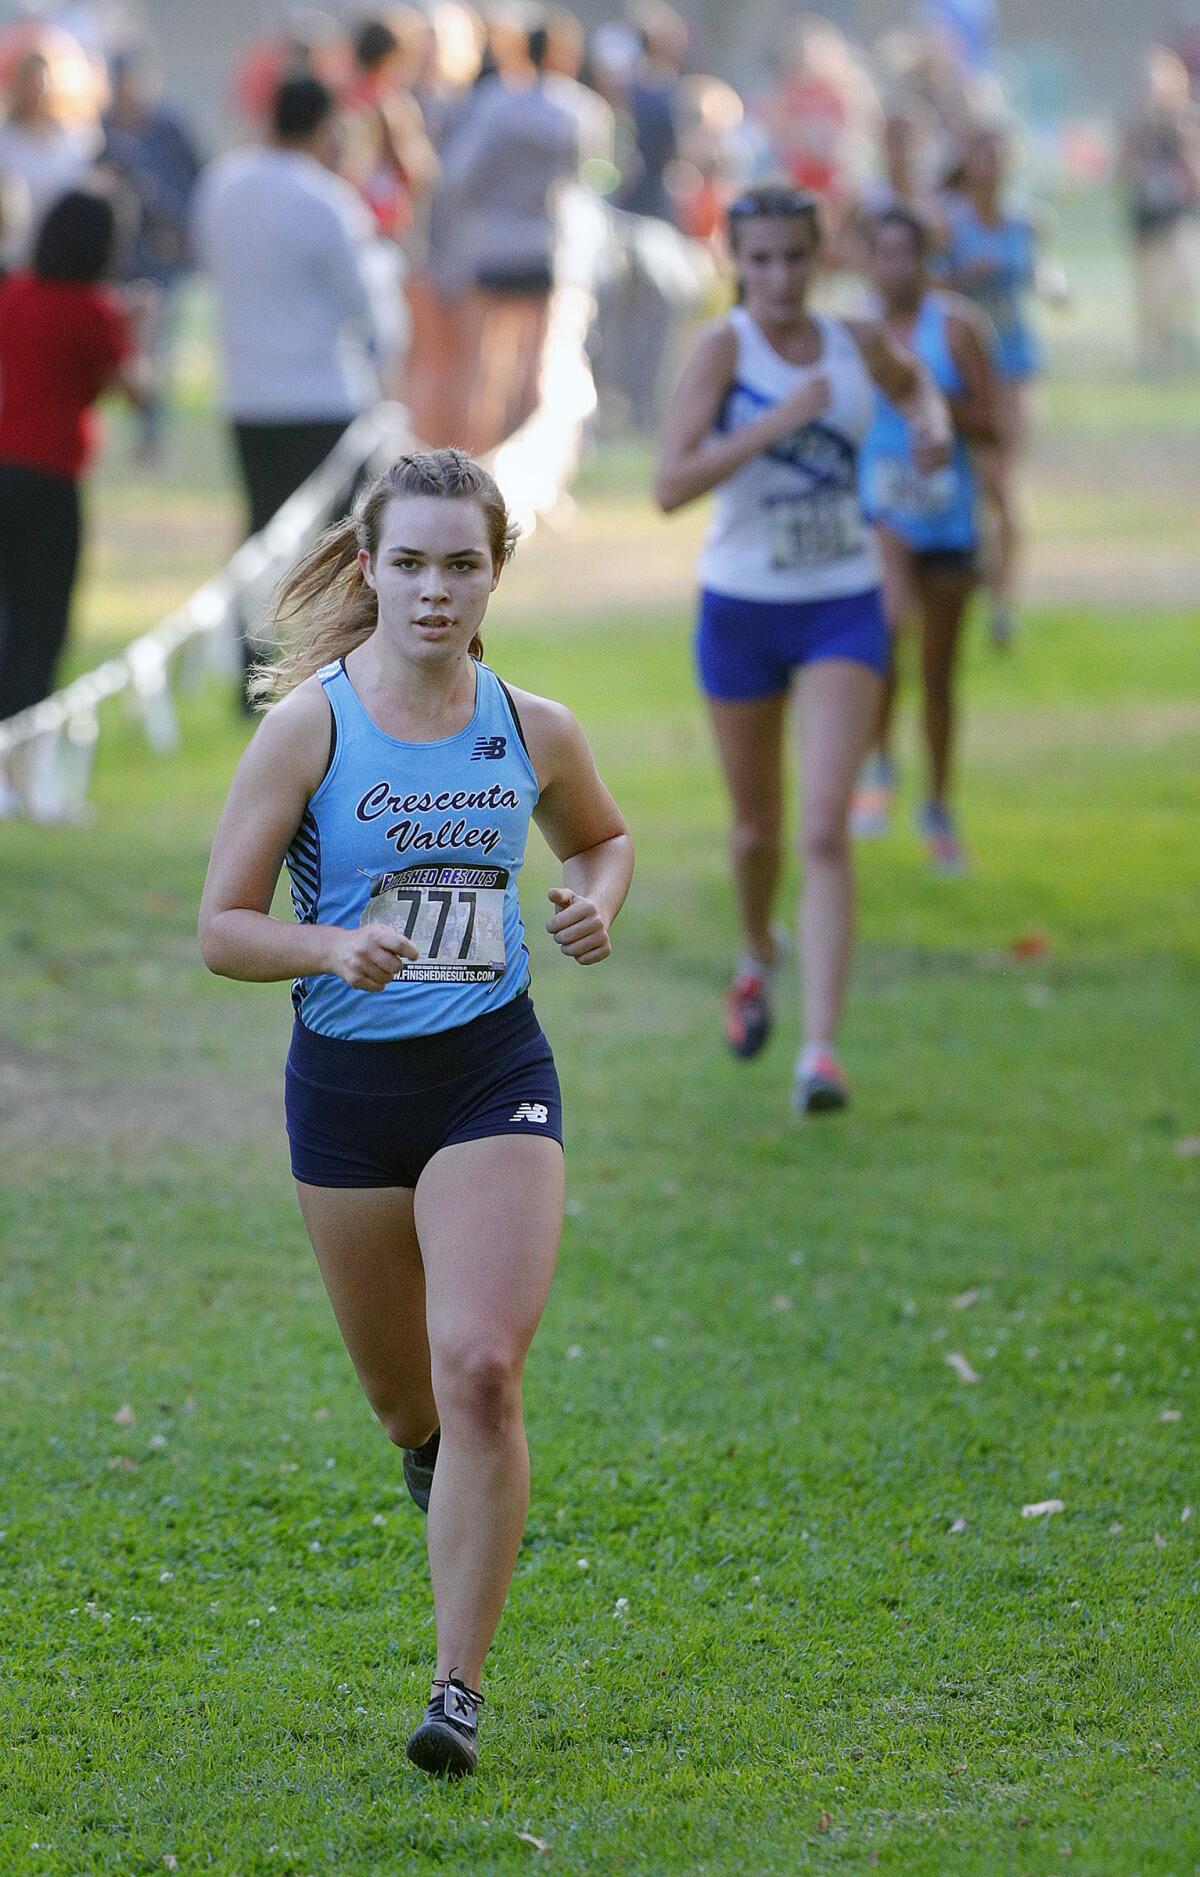 Crescenta Valley's Sophia Atin leads the race in the final mile in a Pacific League cross country meet at Arcadia Park in Arcadia on Thursday, November 7, 2019. This is the final league meet of the season.